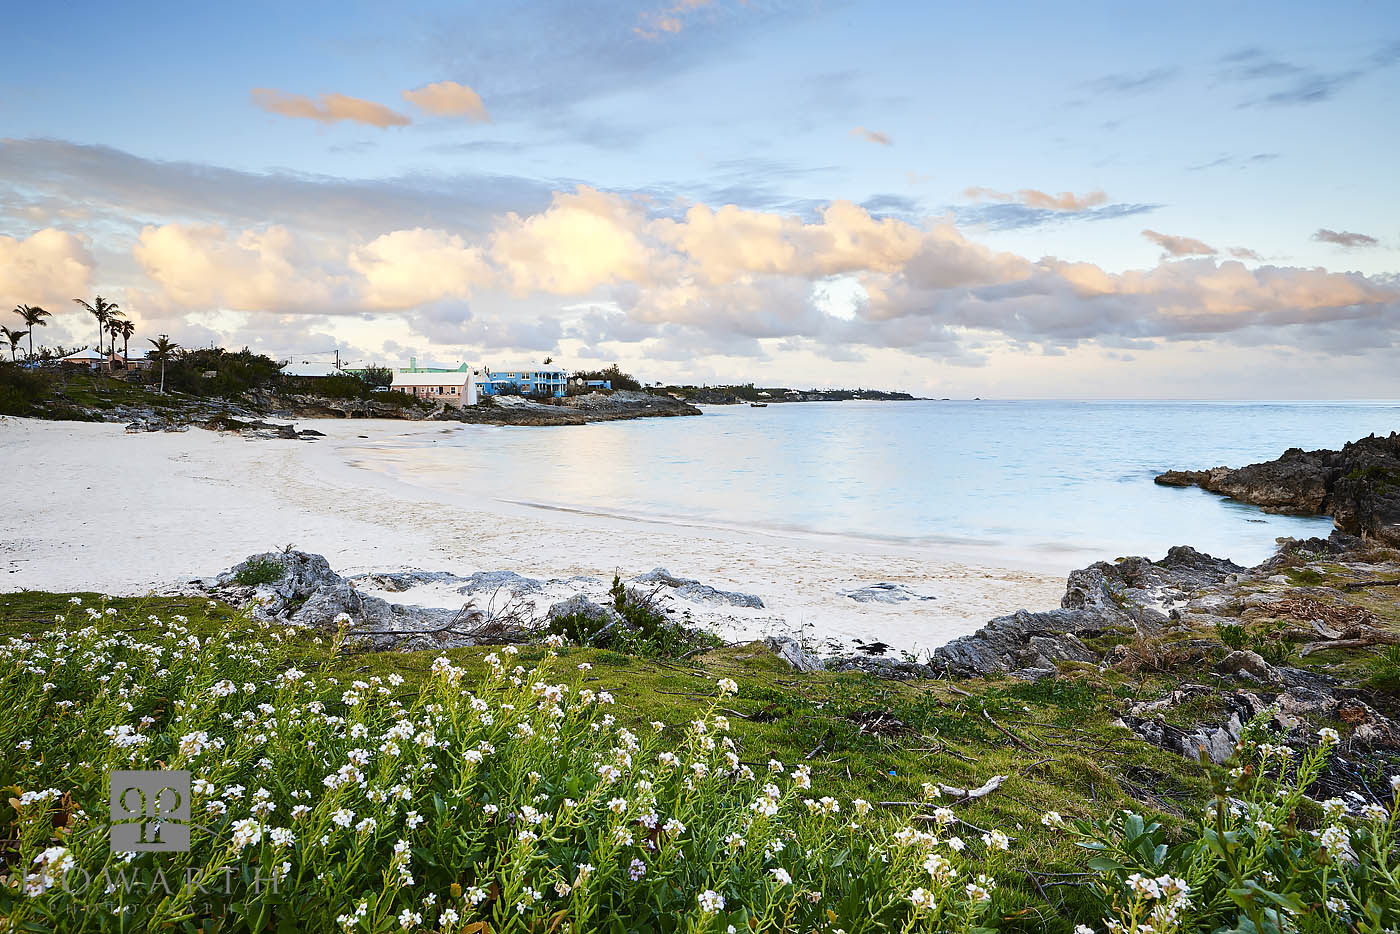 A quiet evening on the beach with a floral foreground&nbsp;